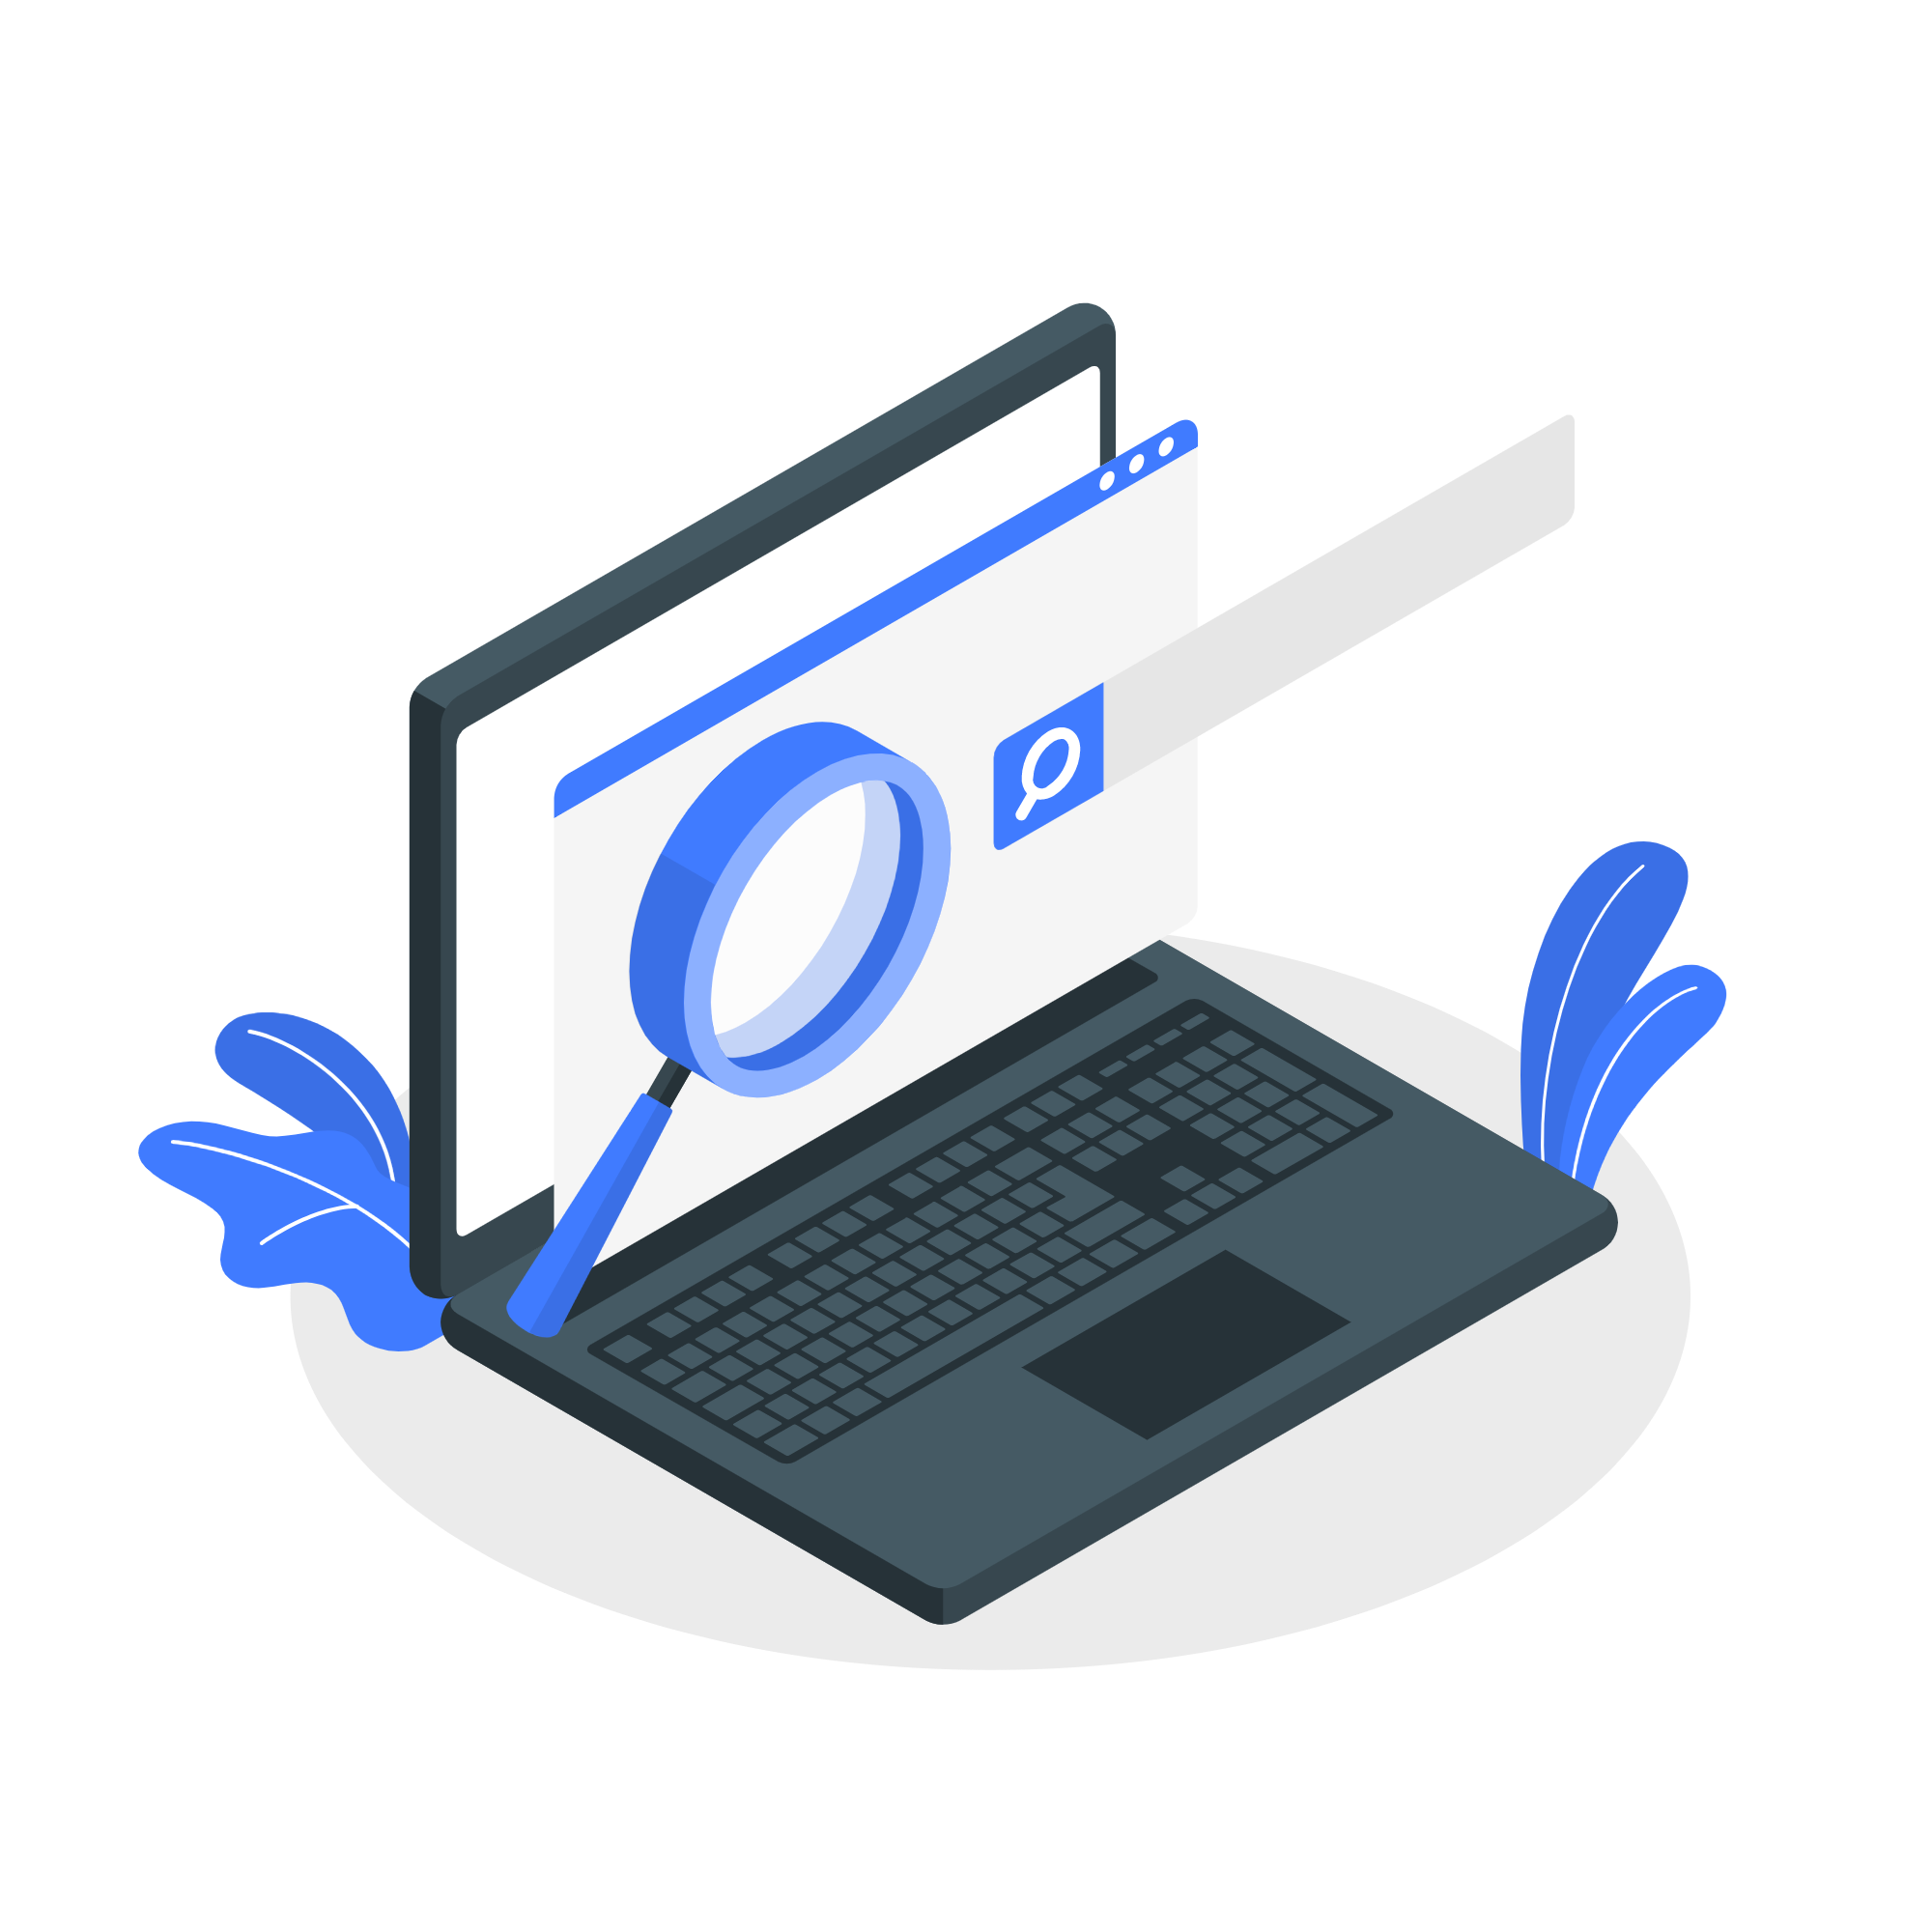 Stylized image of blue laptop with a magnifying glass signaling a search engine. 